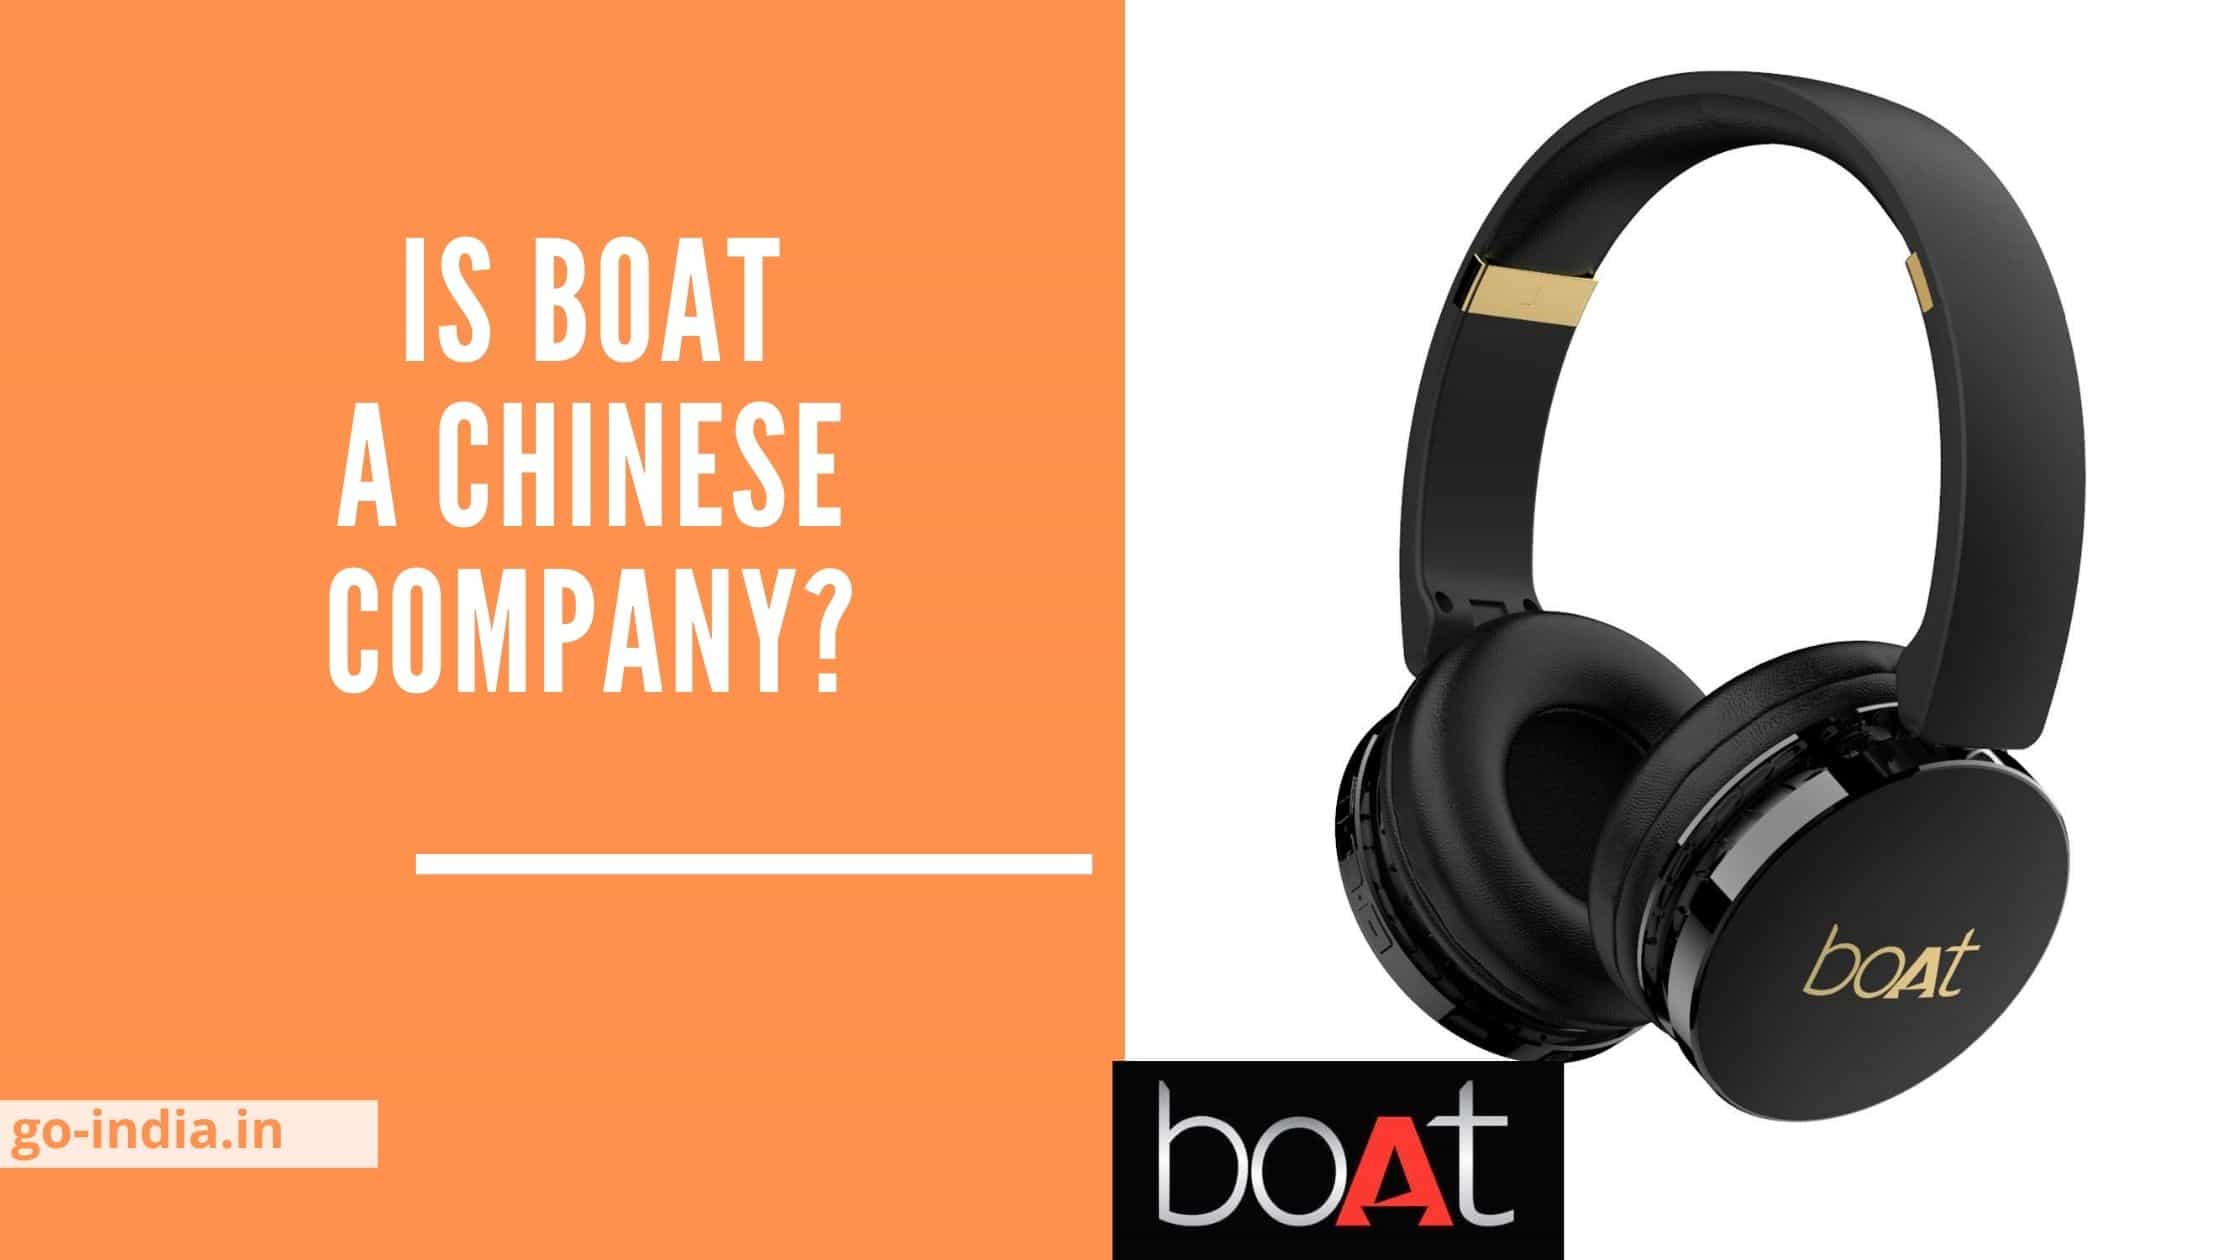 Is Boat a Chinese company